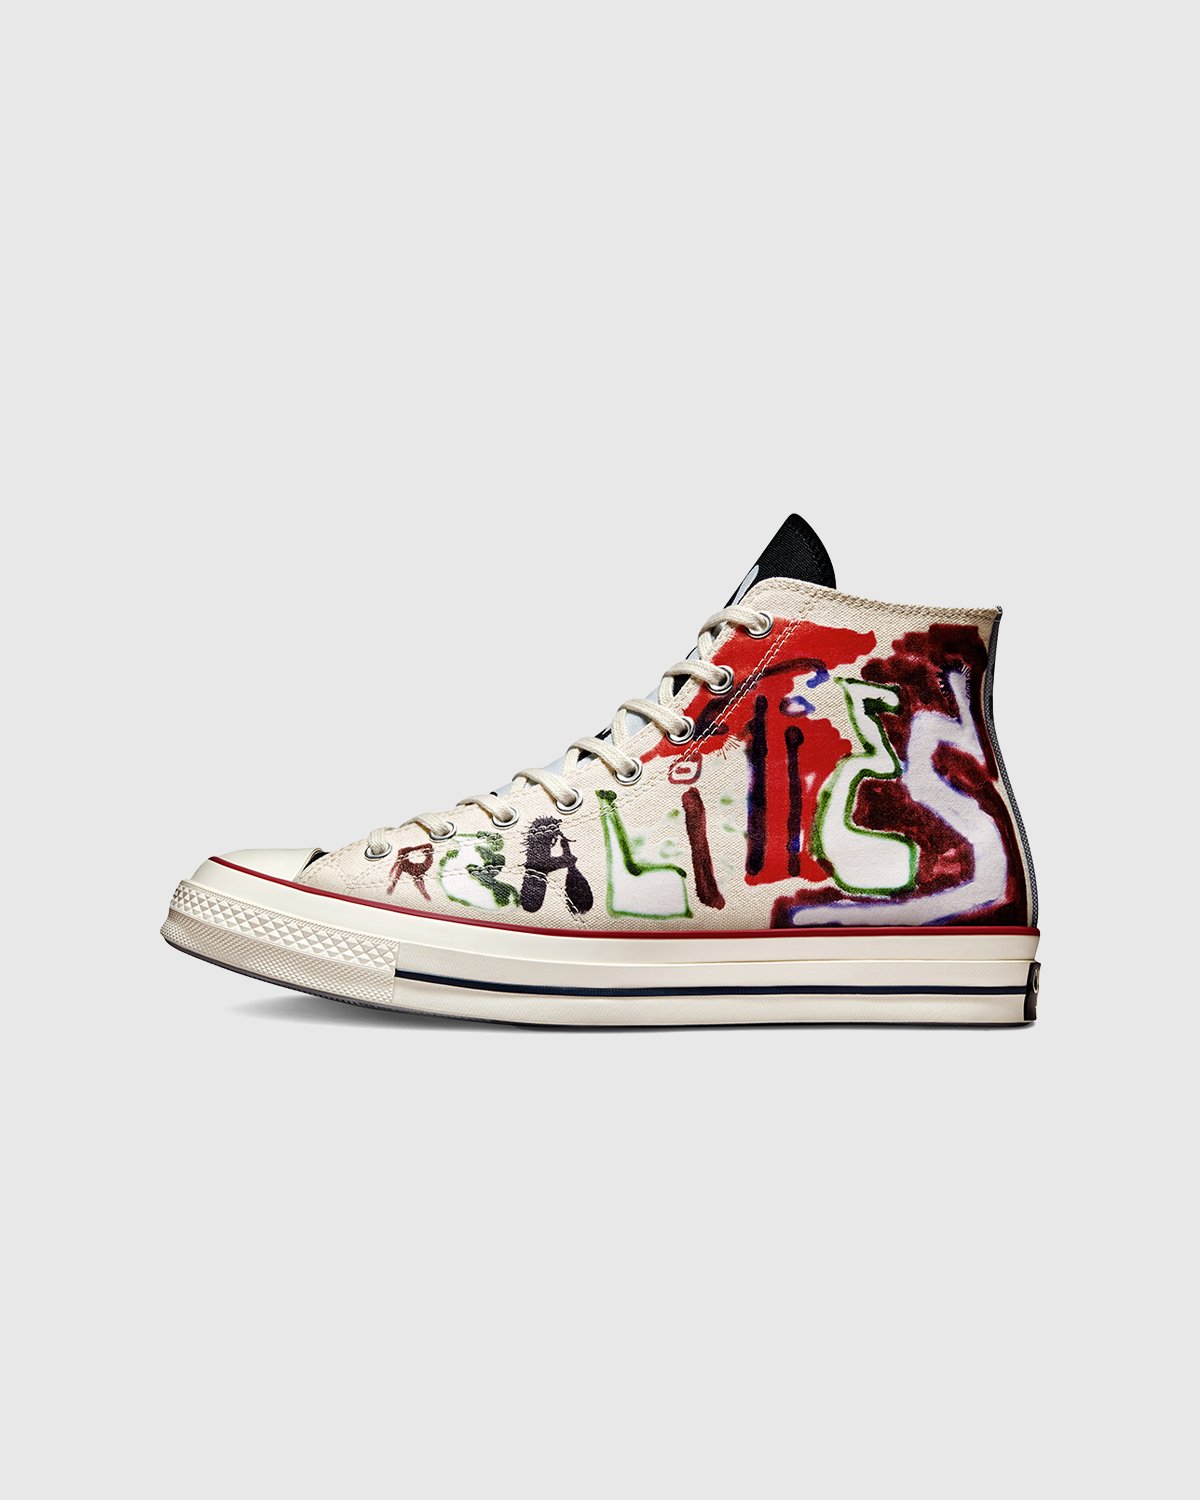 Converse x Come Tees - Chuck 70 Hi White/Multi/Egret - Footwear - Red - Image 2